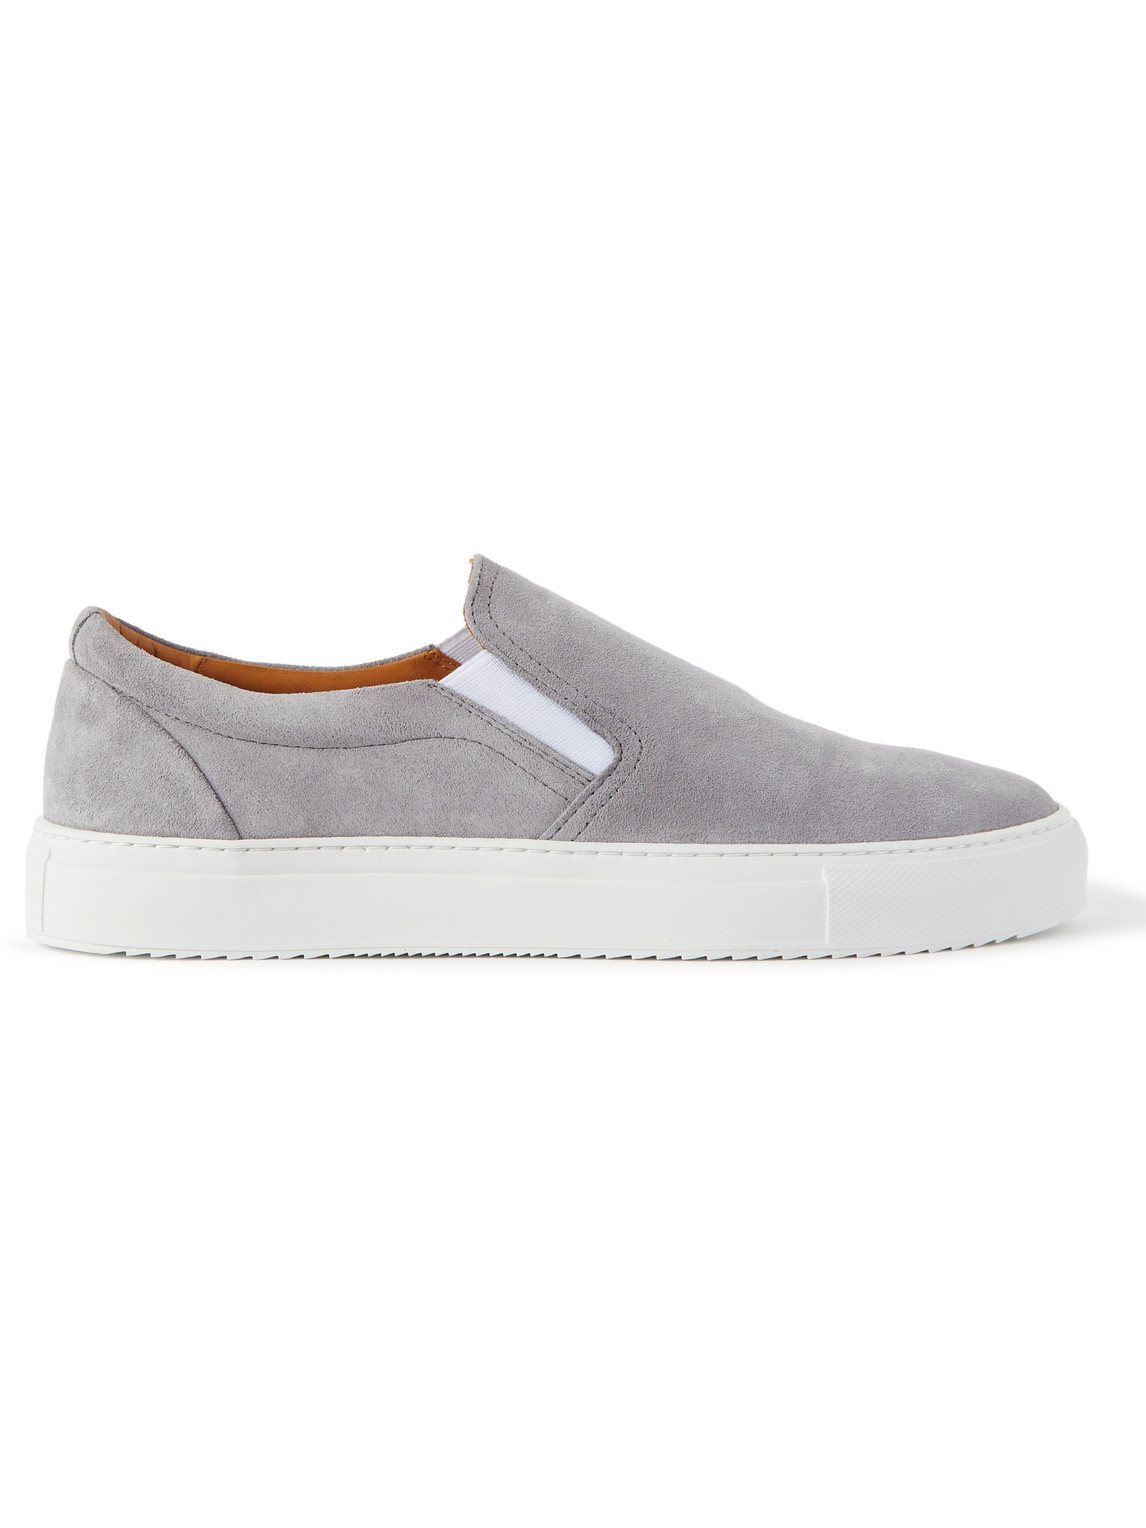 Mr P Regenerated Suede By Evolo® Slip-on Trainers In Purple